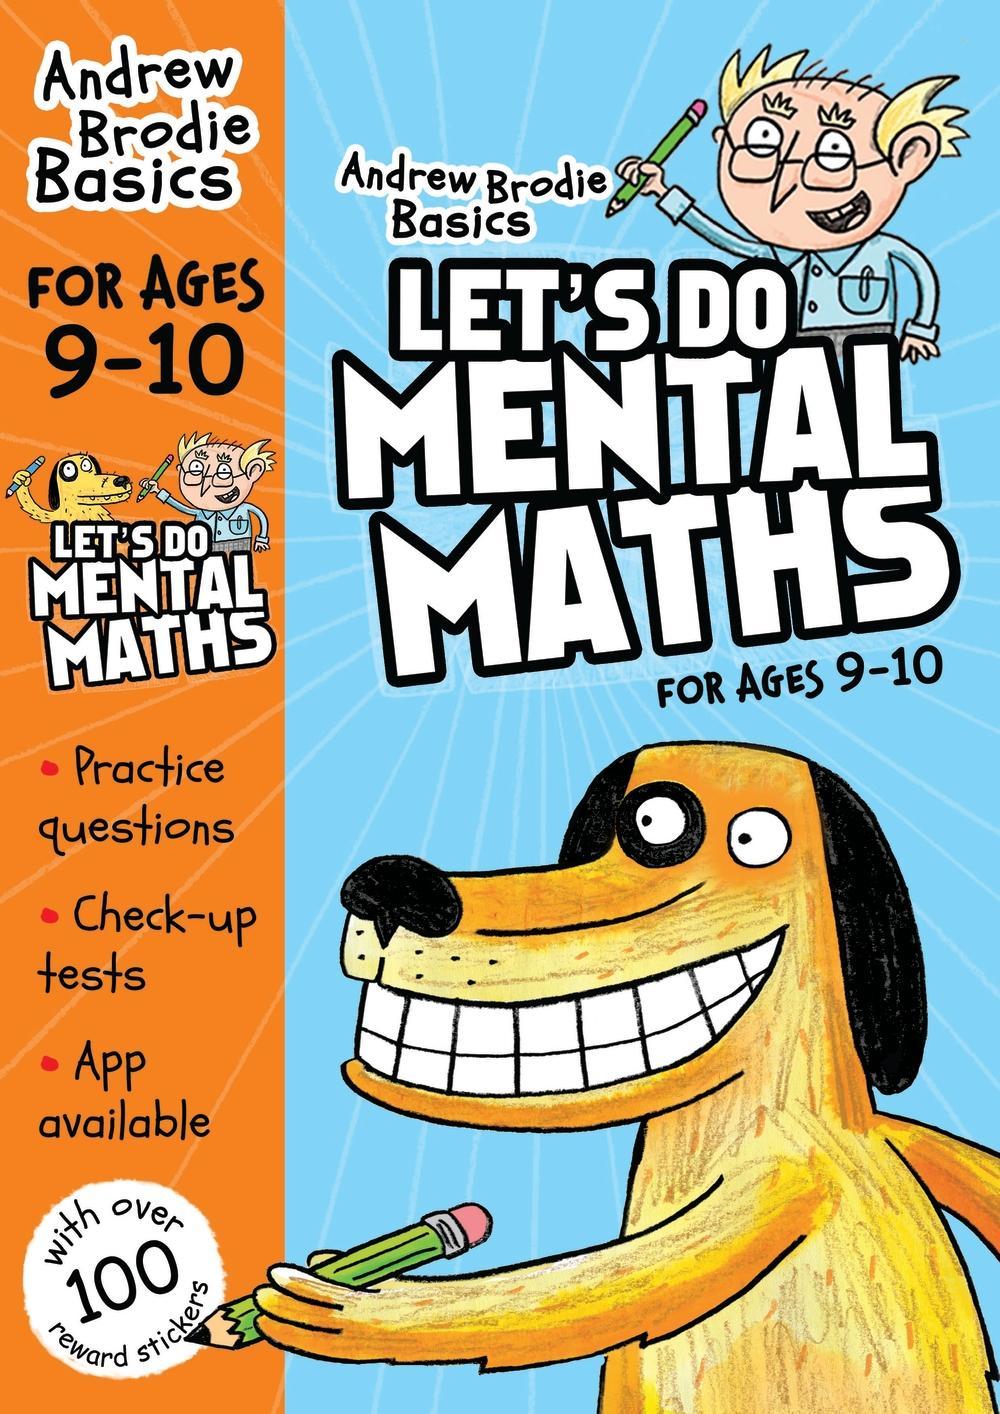 Let's do Mental Maths for ages 9-10 - Andrew Brodie